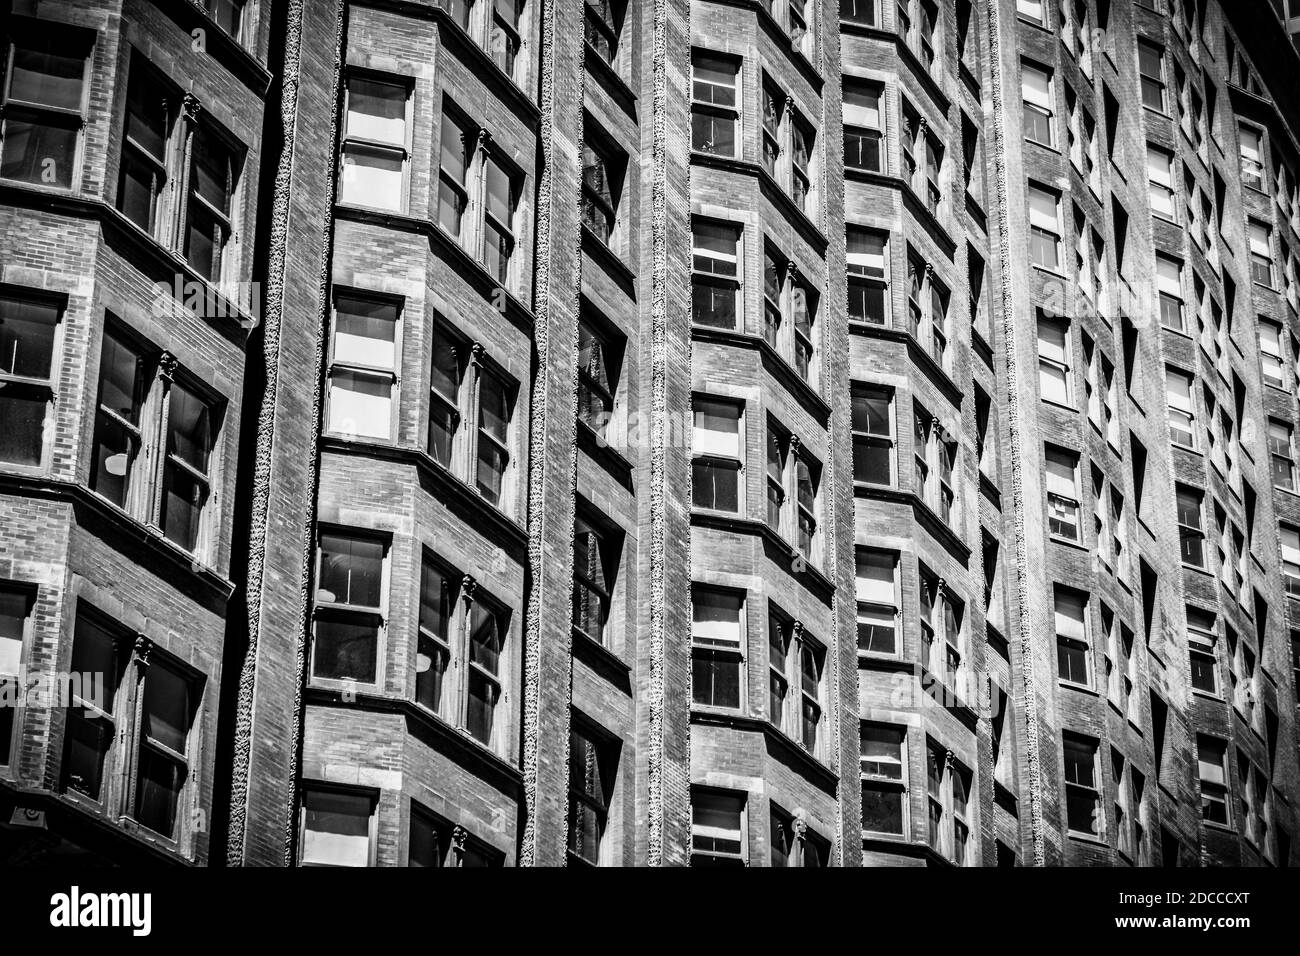 exterior building windows in a row on a historic building in the city Stock Photo